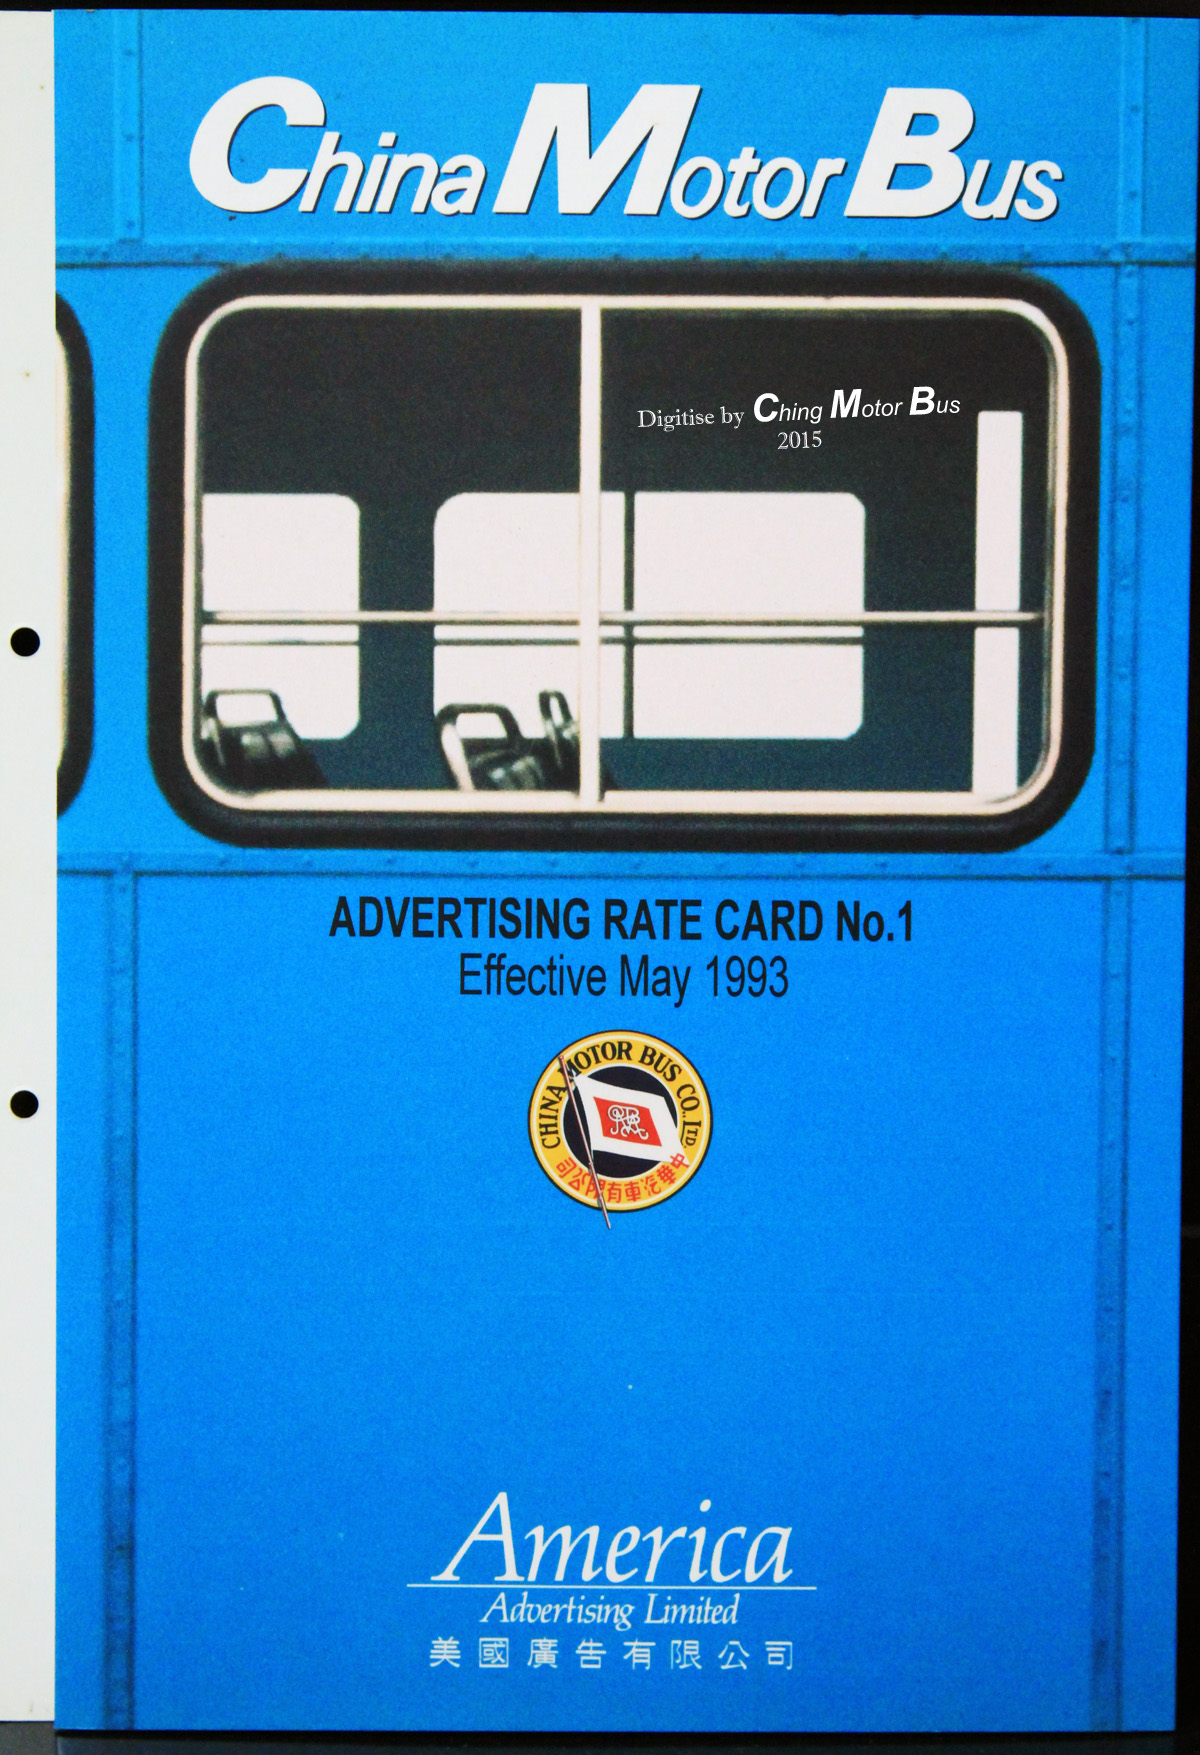 CMB-Advertising Rate Card-P1a.jpg